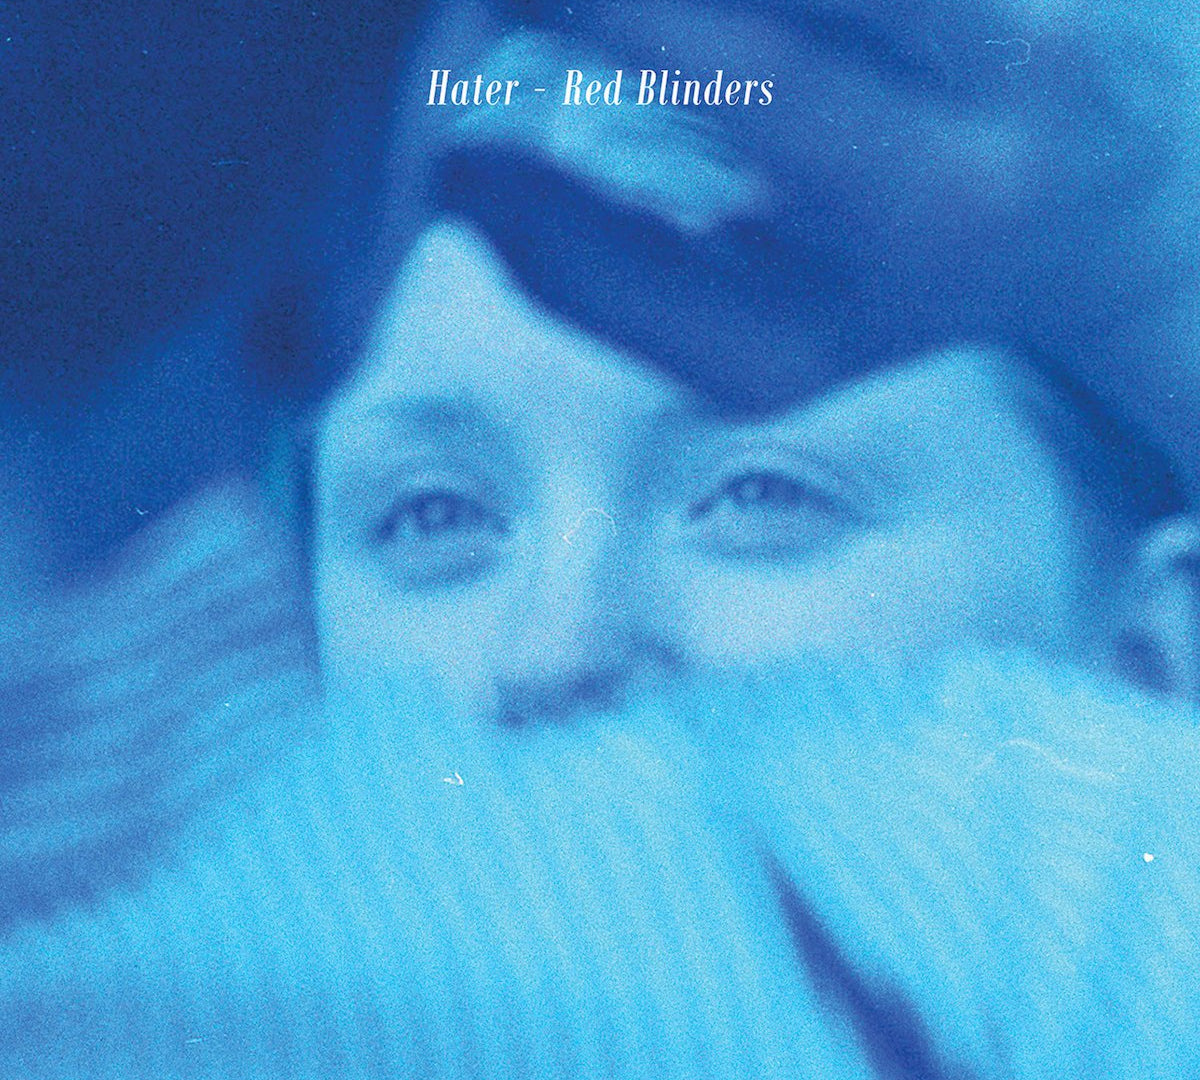 Hater - Red Blinders